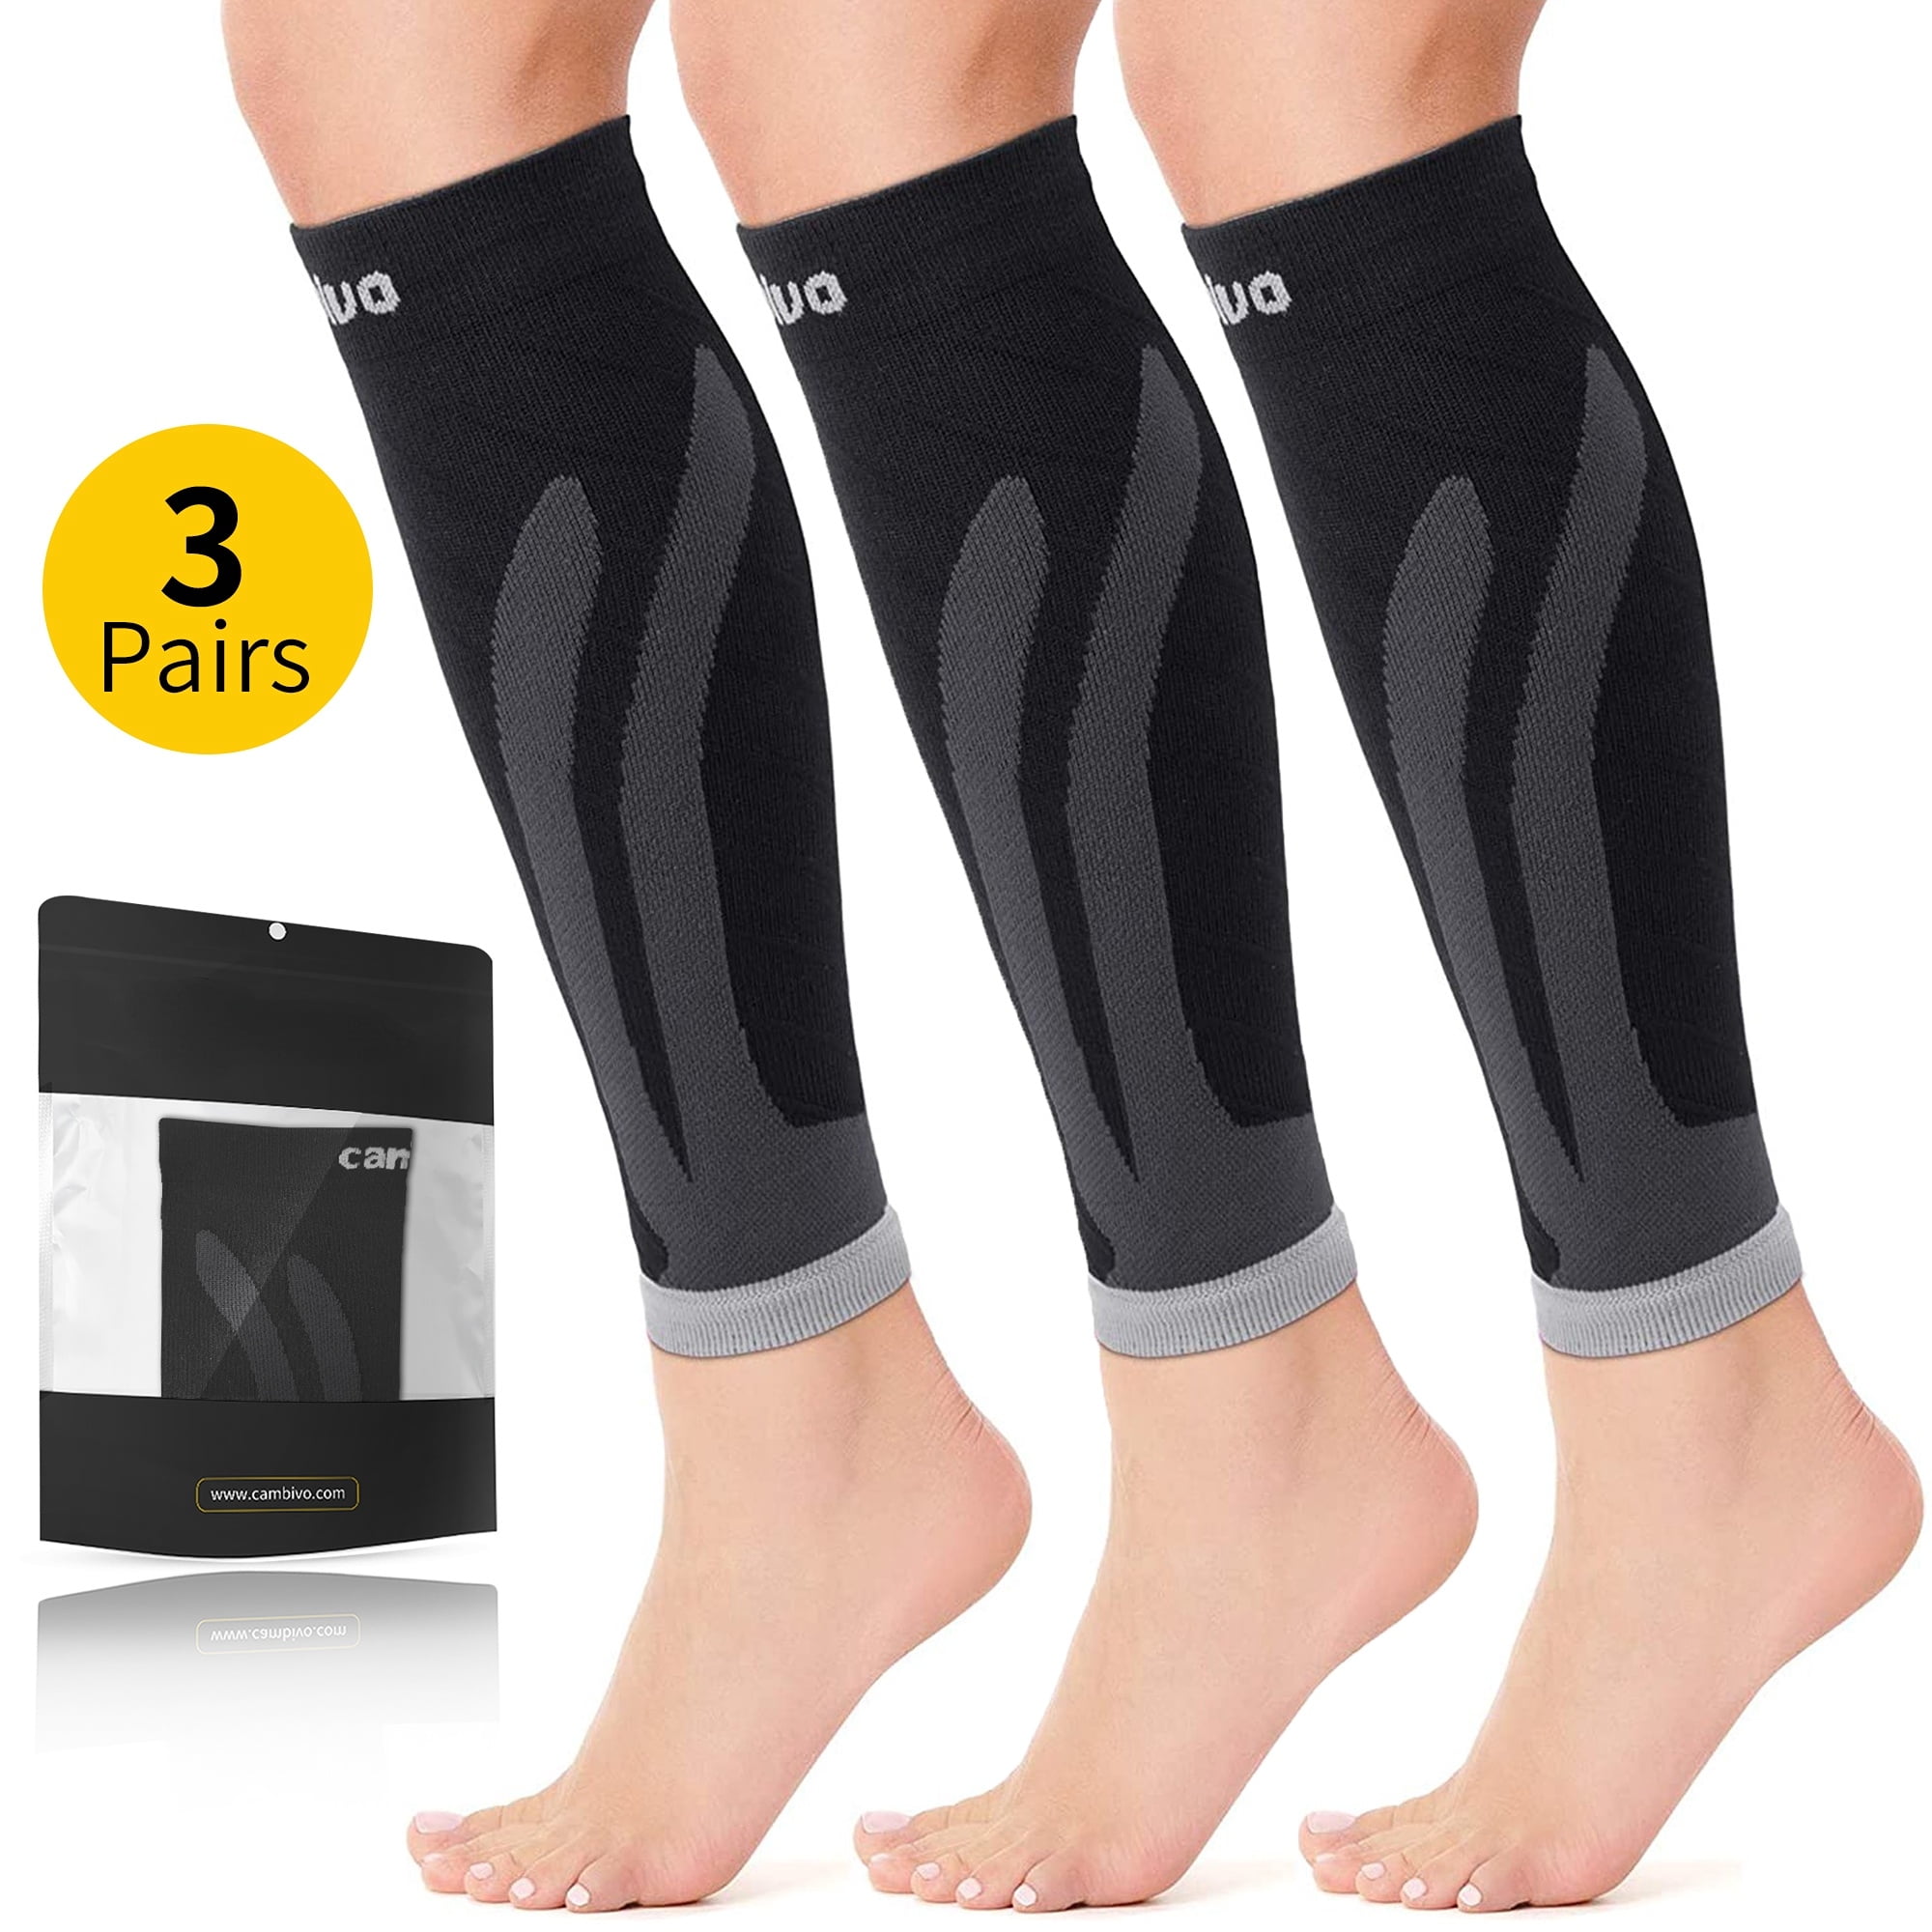 Calf Compression Sleeves For Men And Women - Leg Compression Sleeve - Footless  Compression Socks for Runners, Shin Splints, Varicose Vein & Calf Pain  Relief - Calf Brace For Running, Cycling, Travel 